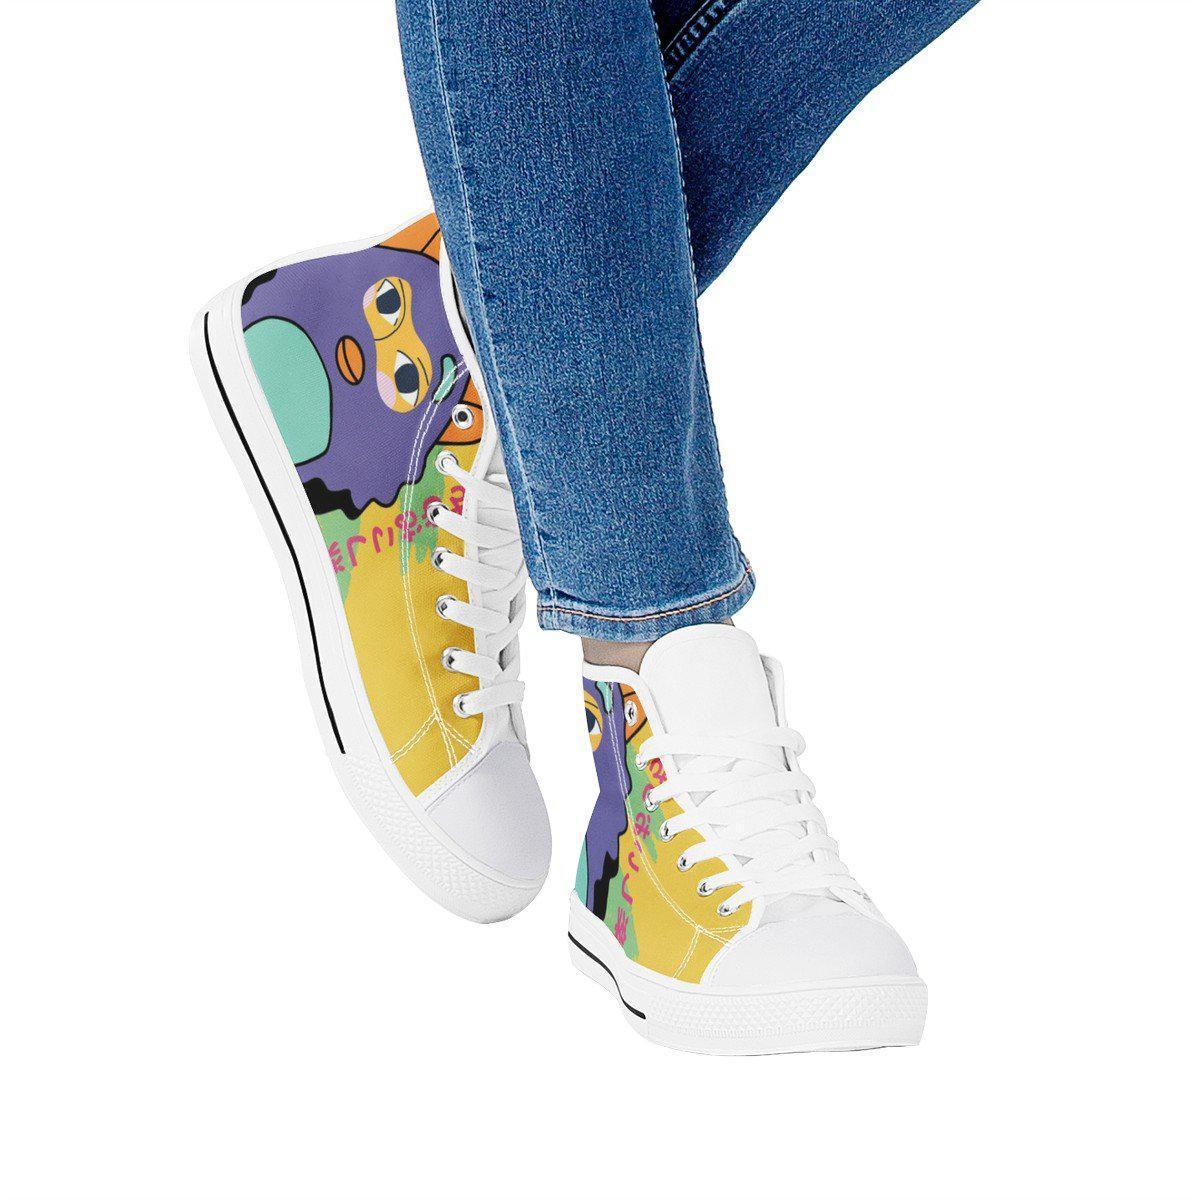 This is a Fun Toy High Top Canvas Shoes (White) – INKofART.com